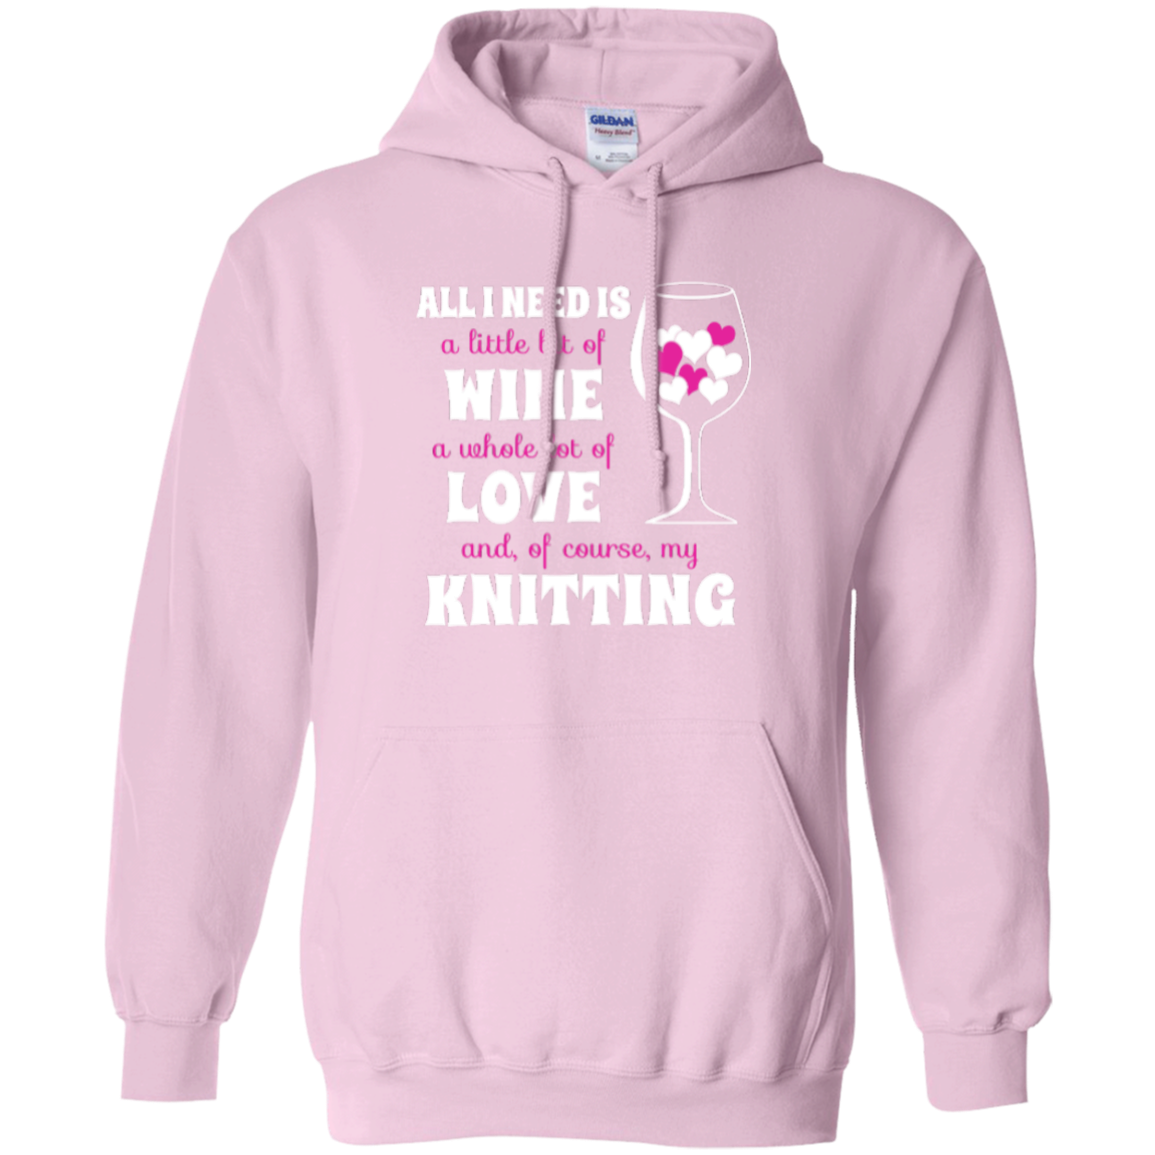 All I Need is Wine-Love-Knitting Pullover Hoodies - Crafter4Life - 11